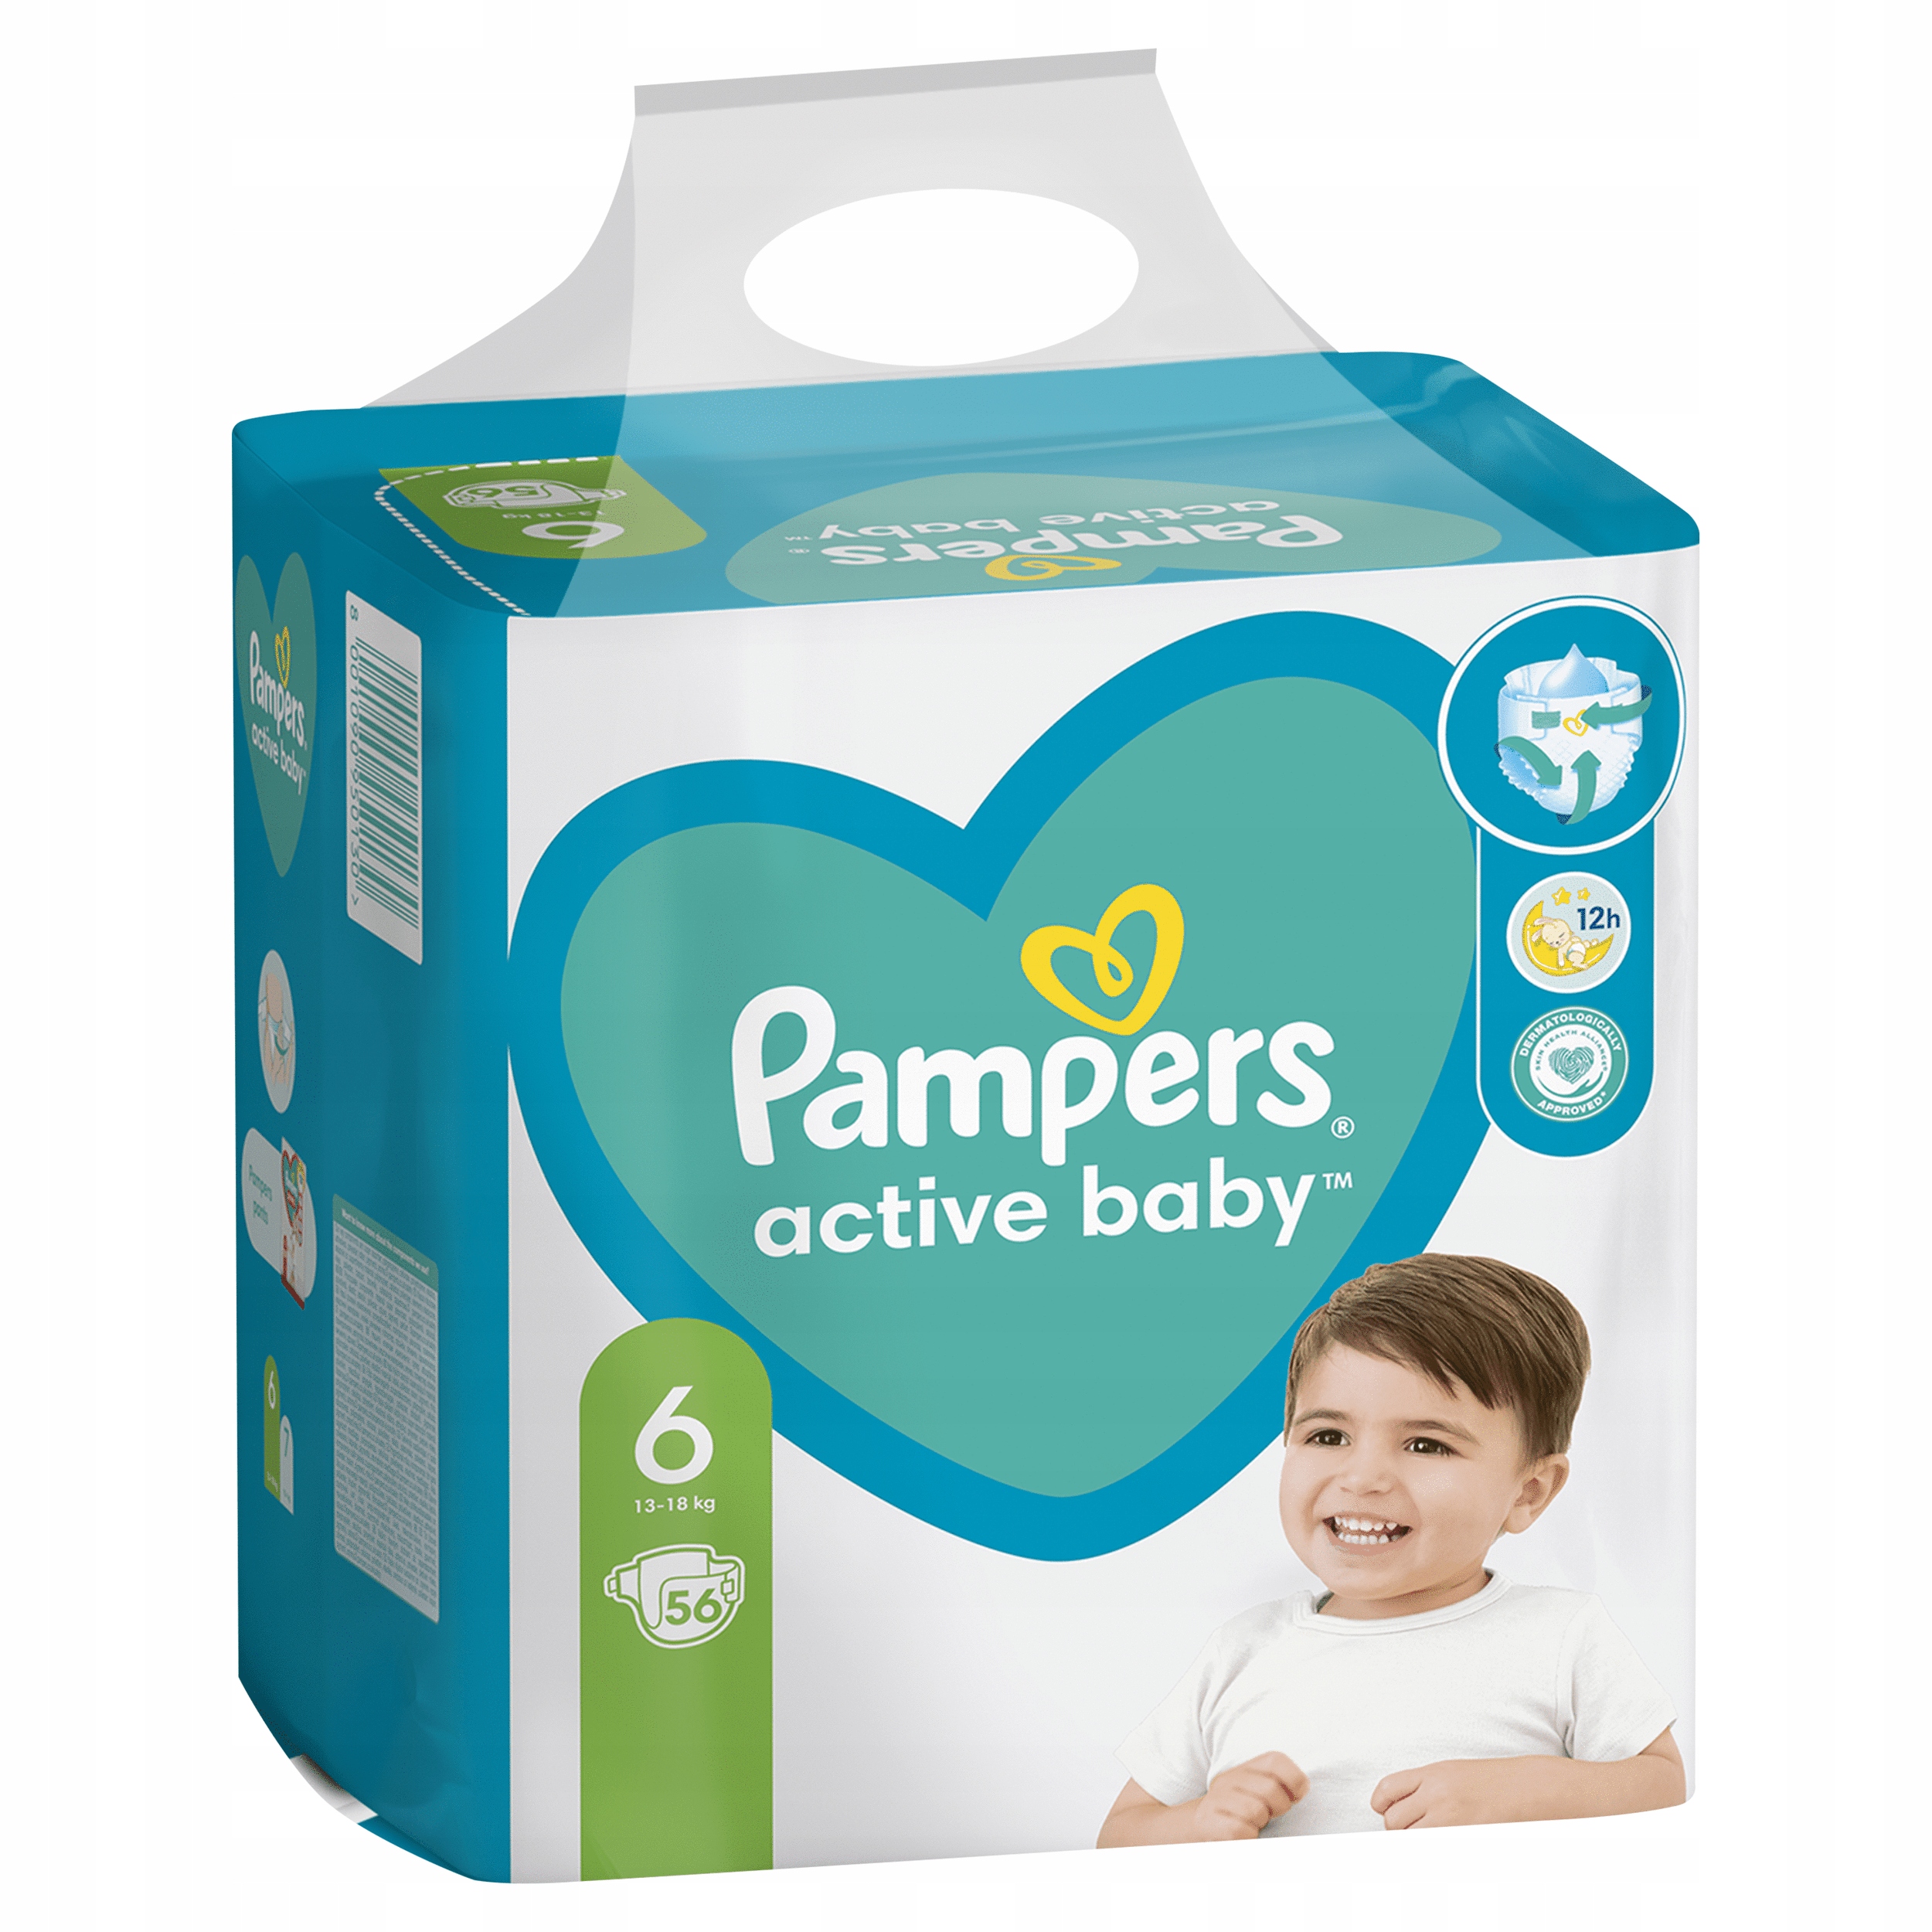 pampers premium care cechy